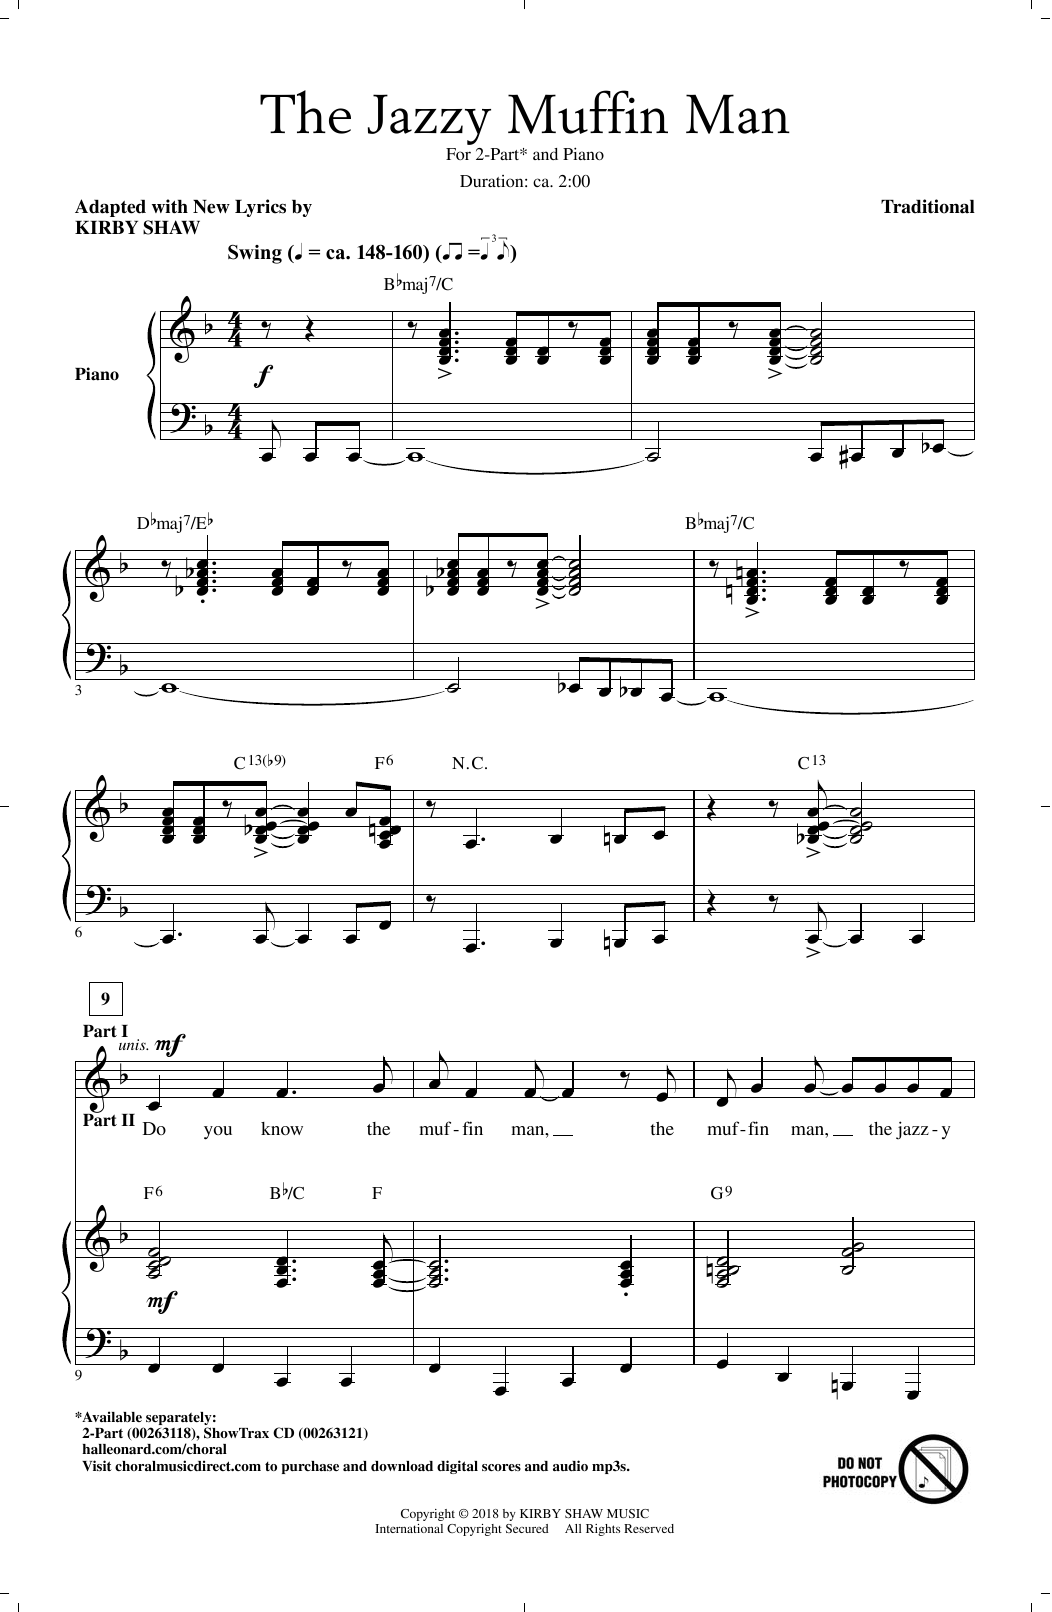 Download Kirby Shaw The Jazzy Muffin Man Sheet Music